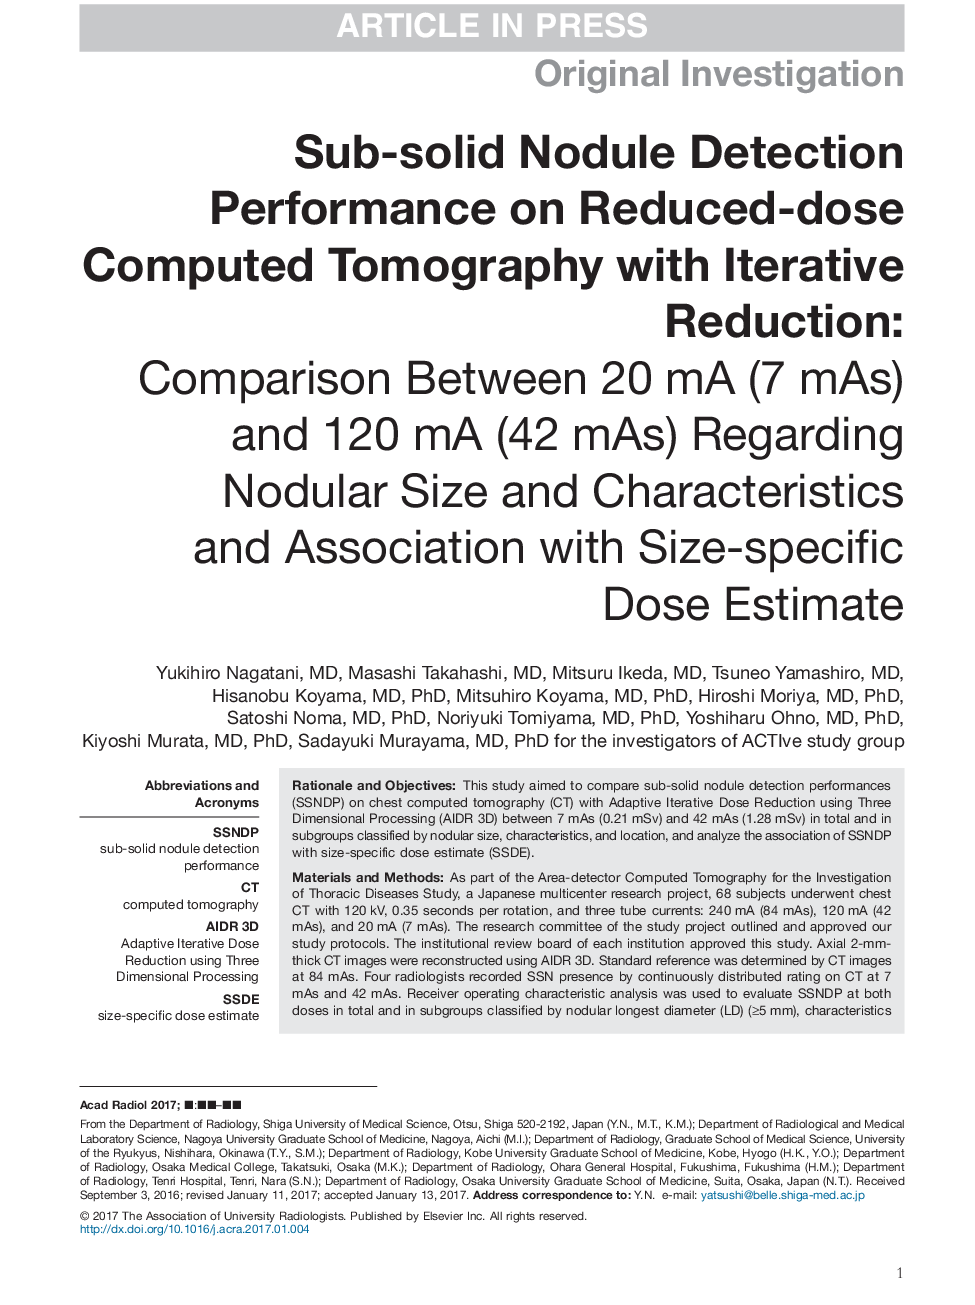 Sub-solid Nodule Detection Performance on Reduced-dose Computed Tomography with Iterative Reduction